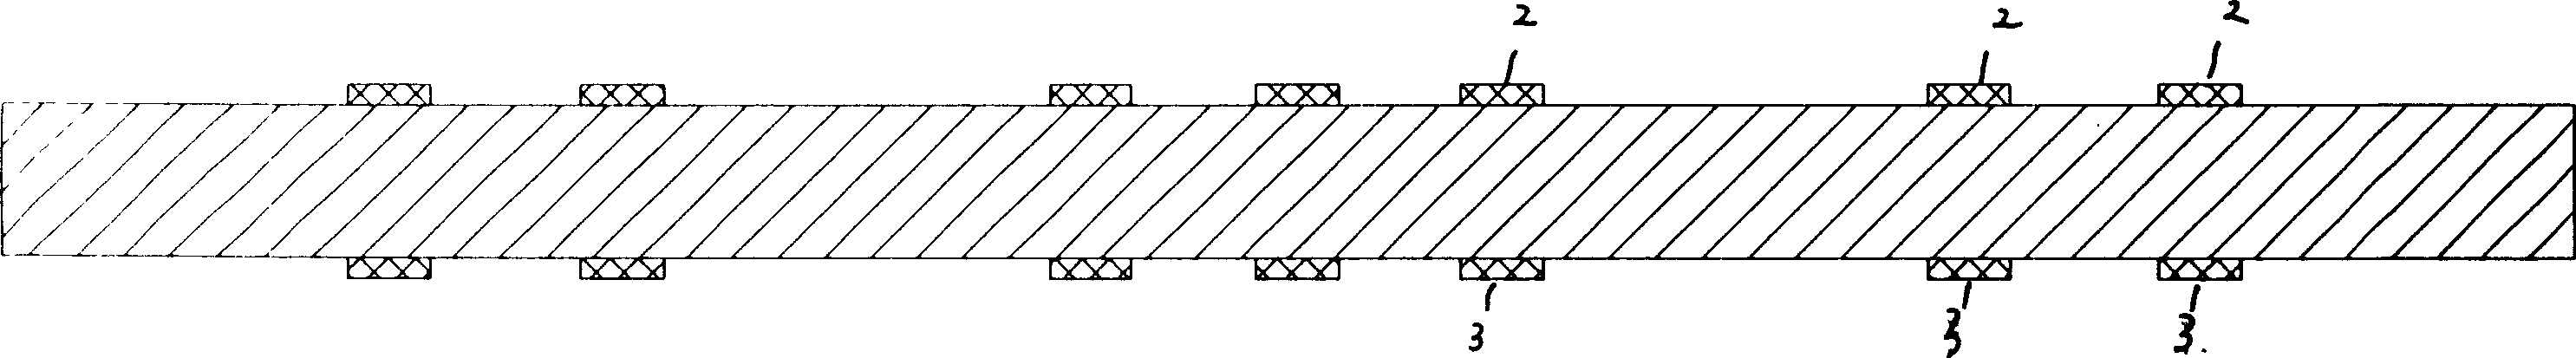 Integrated circuit or discrete component flat bump package technics and its package structure